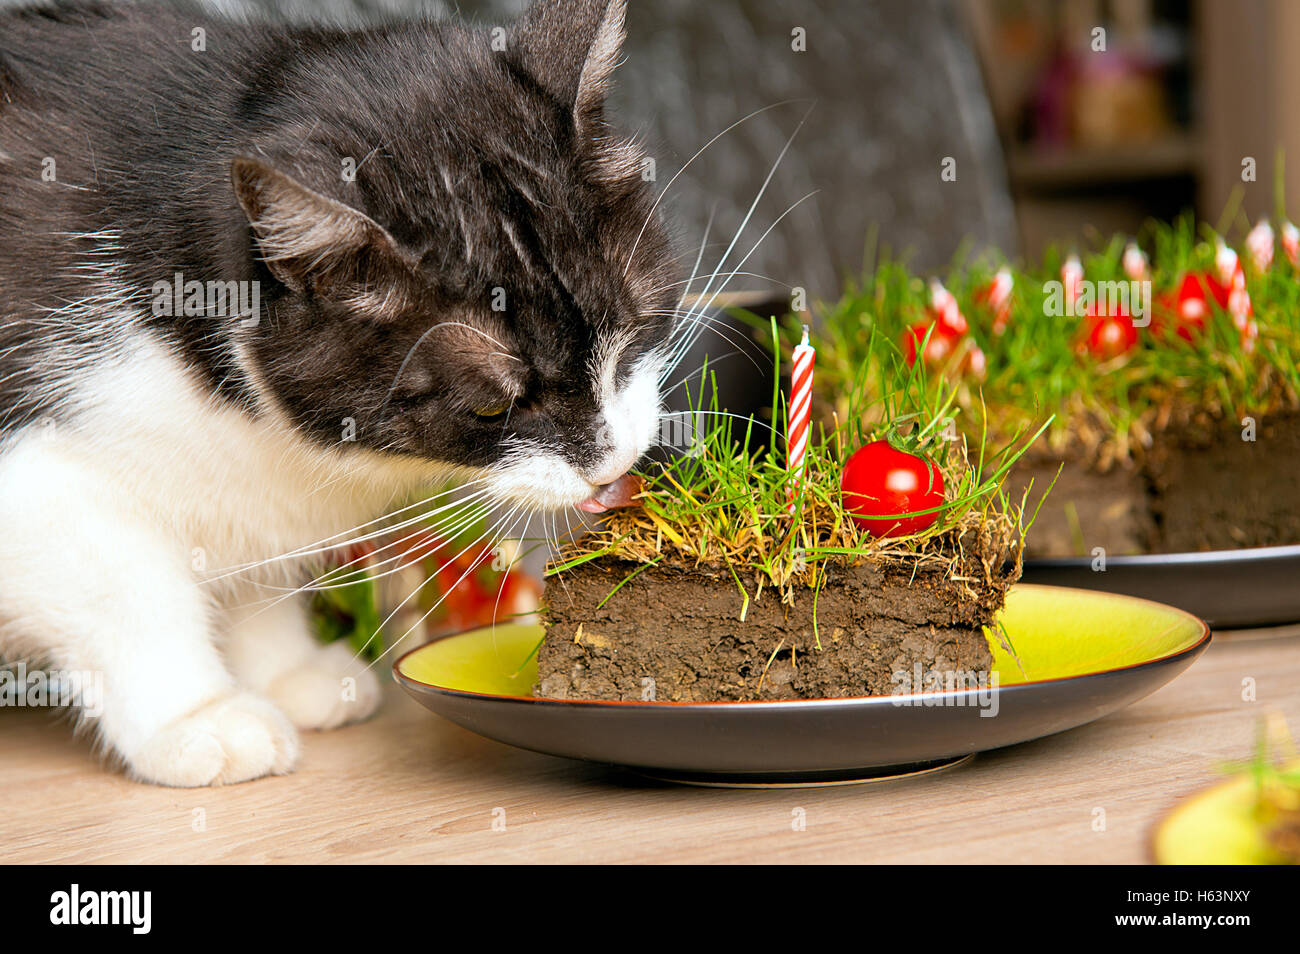 A gray and white cat sniffing a slice of a cake made from ground, grass and cherry tomatoes. Stock Photo